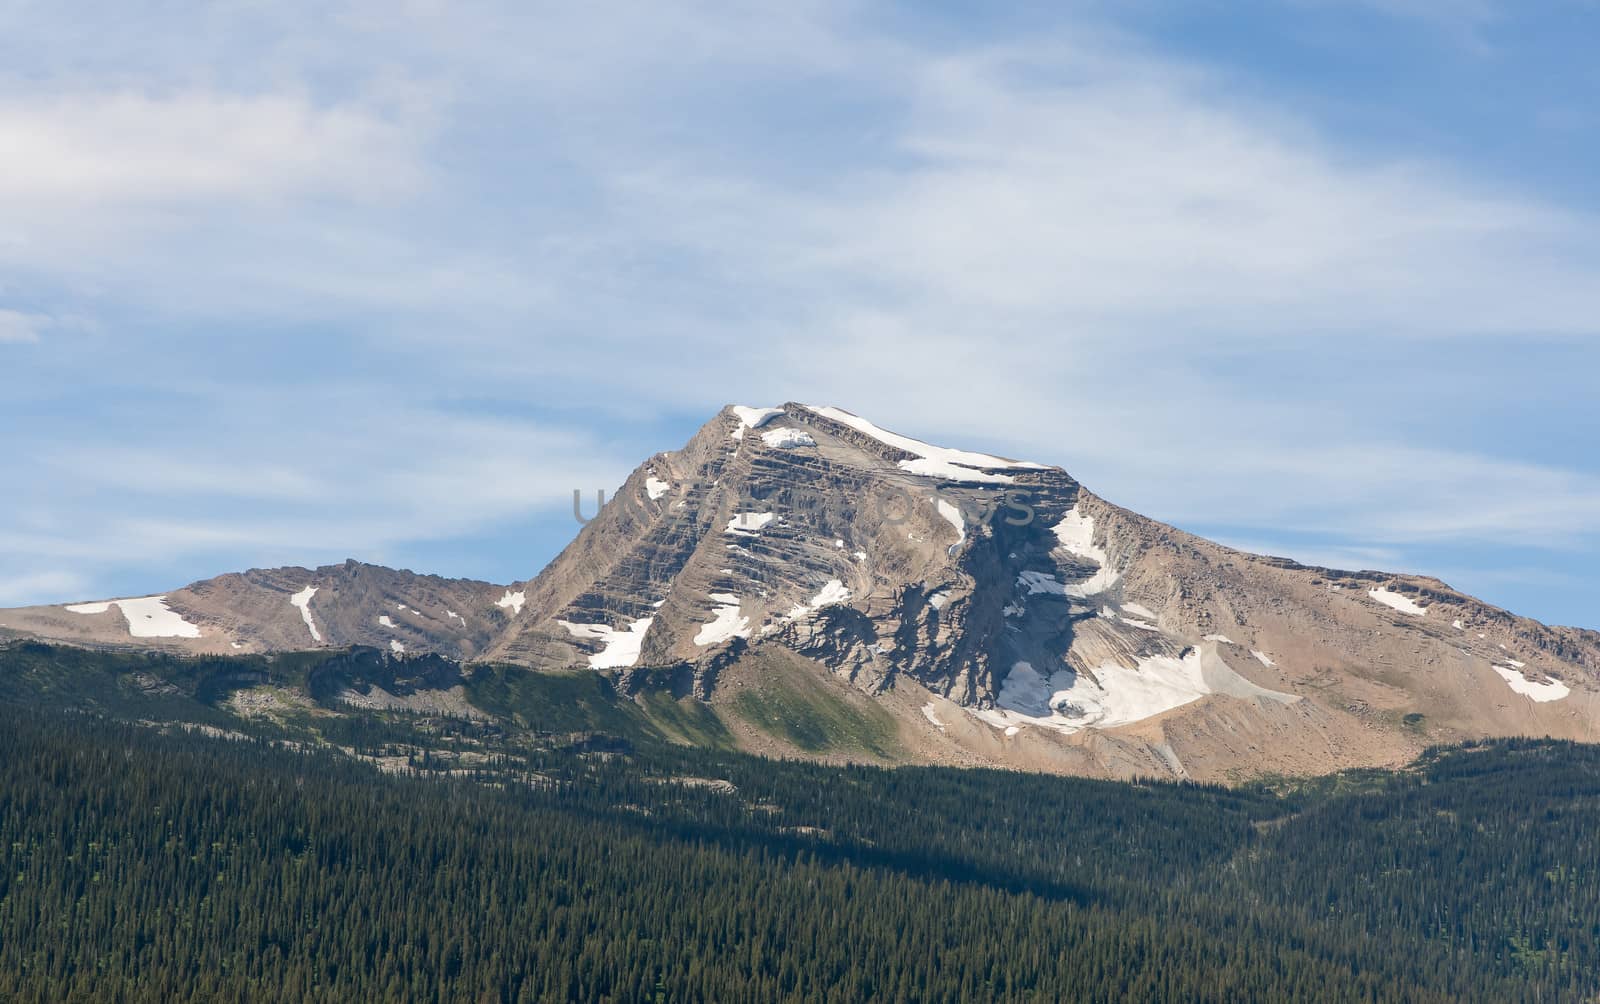 This image shows some of the famous rugged views seen throughout Glacier National Park.